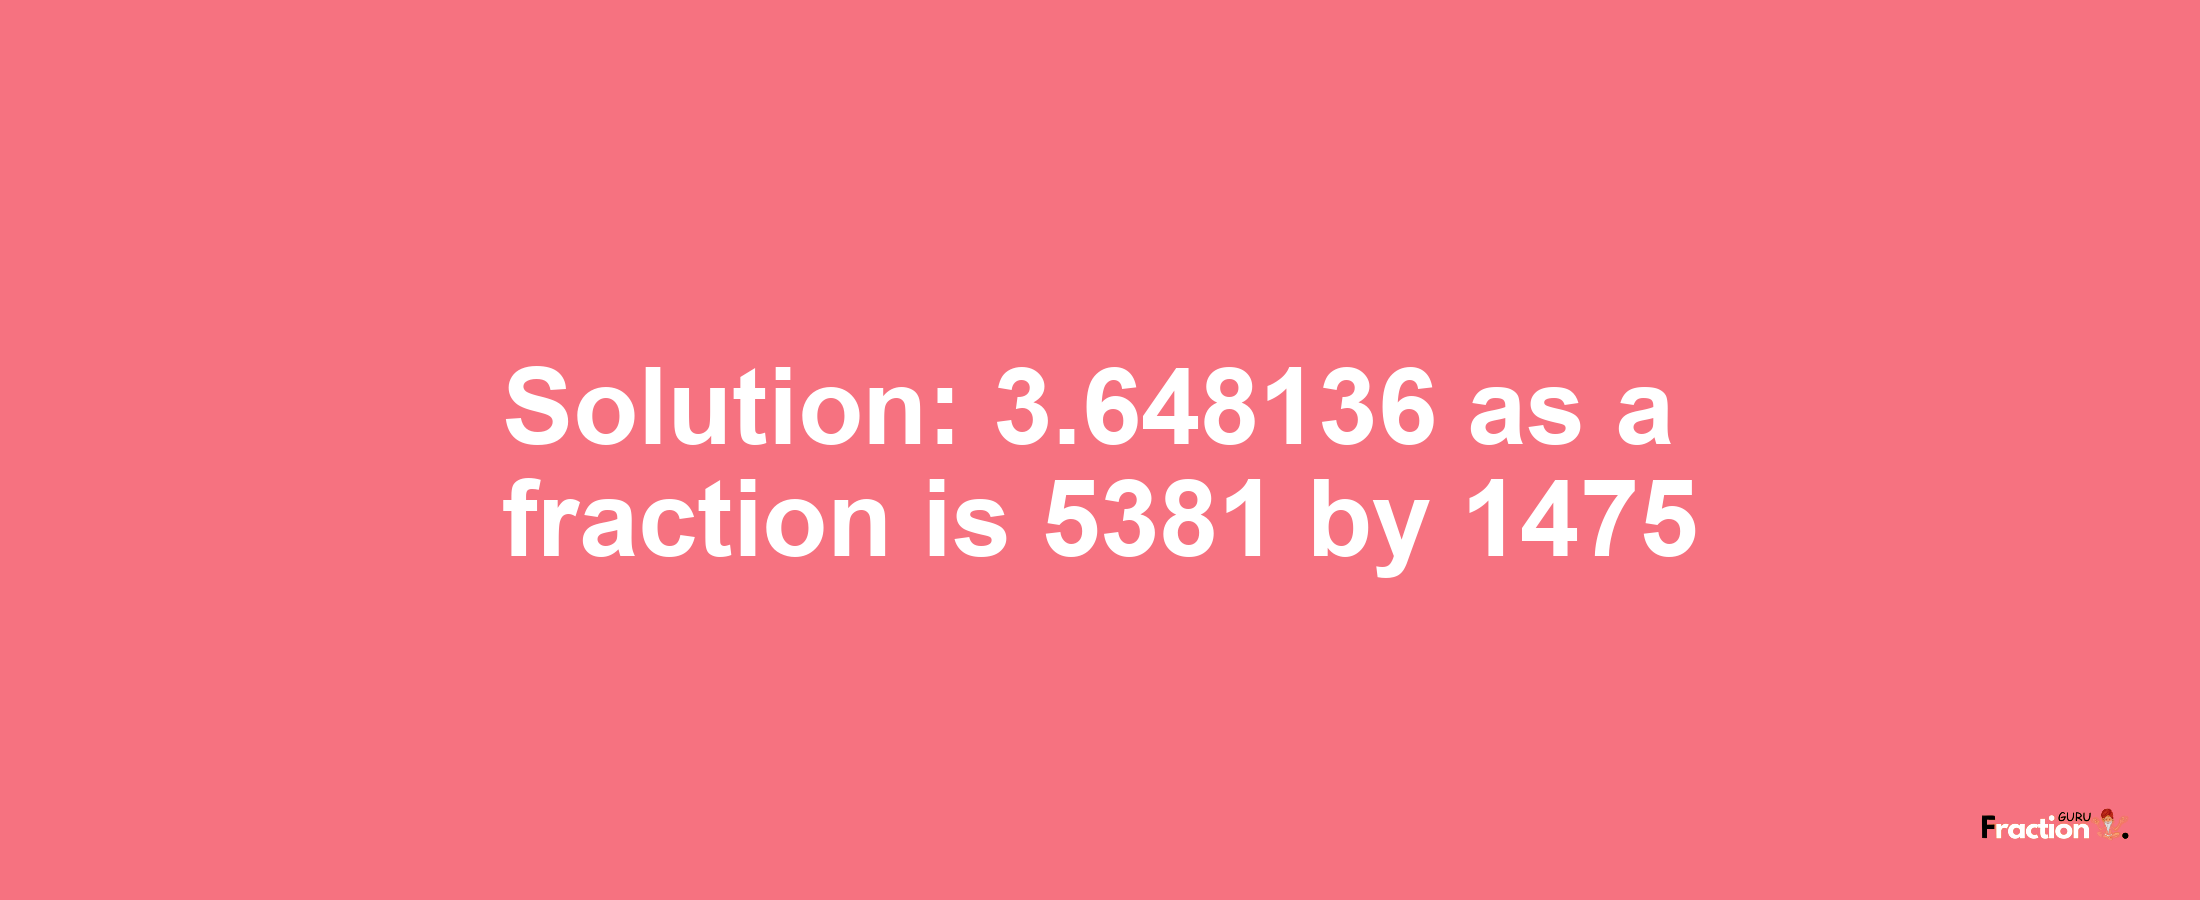 Solution:3.648136 as a fraction is 5381/1475